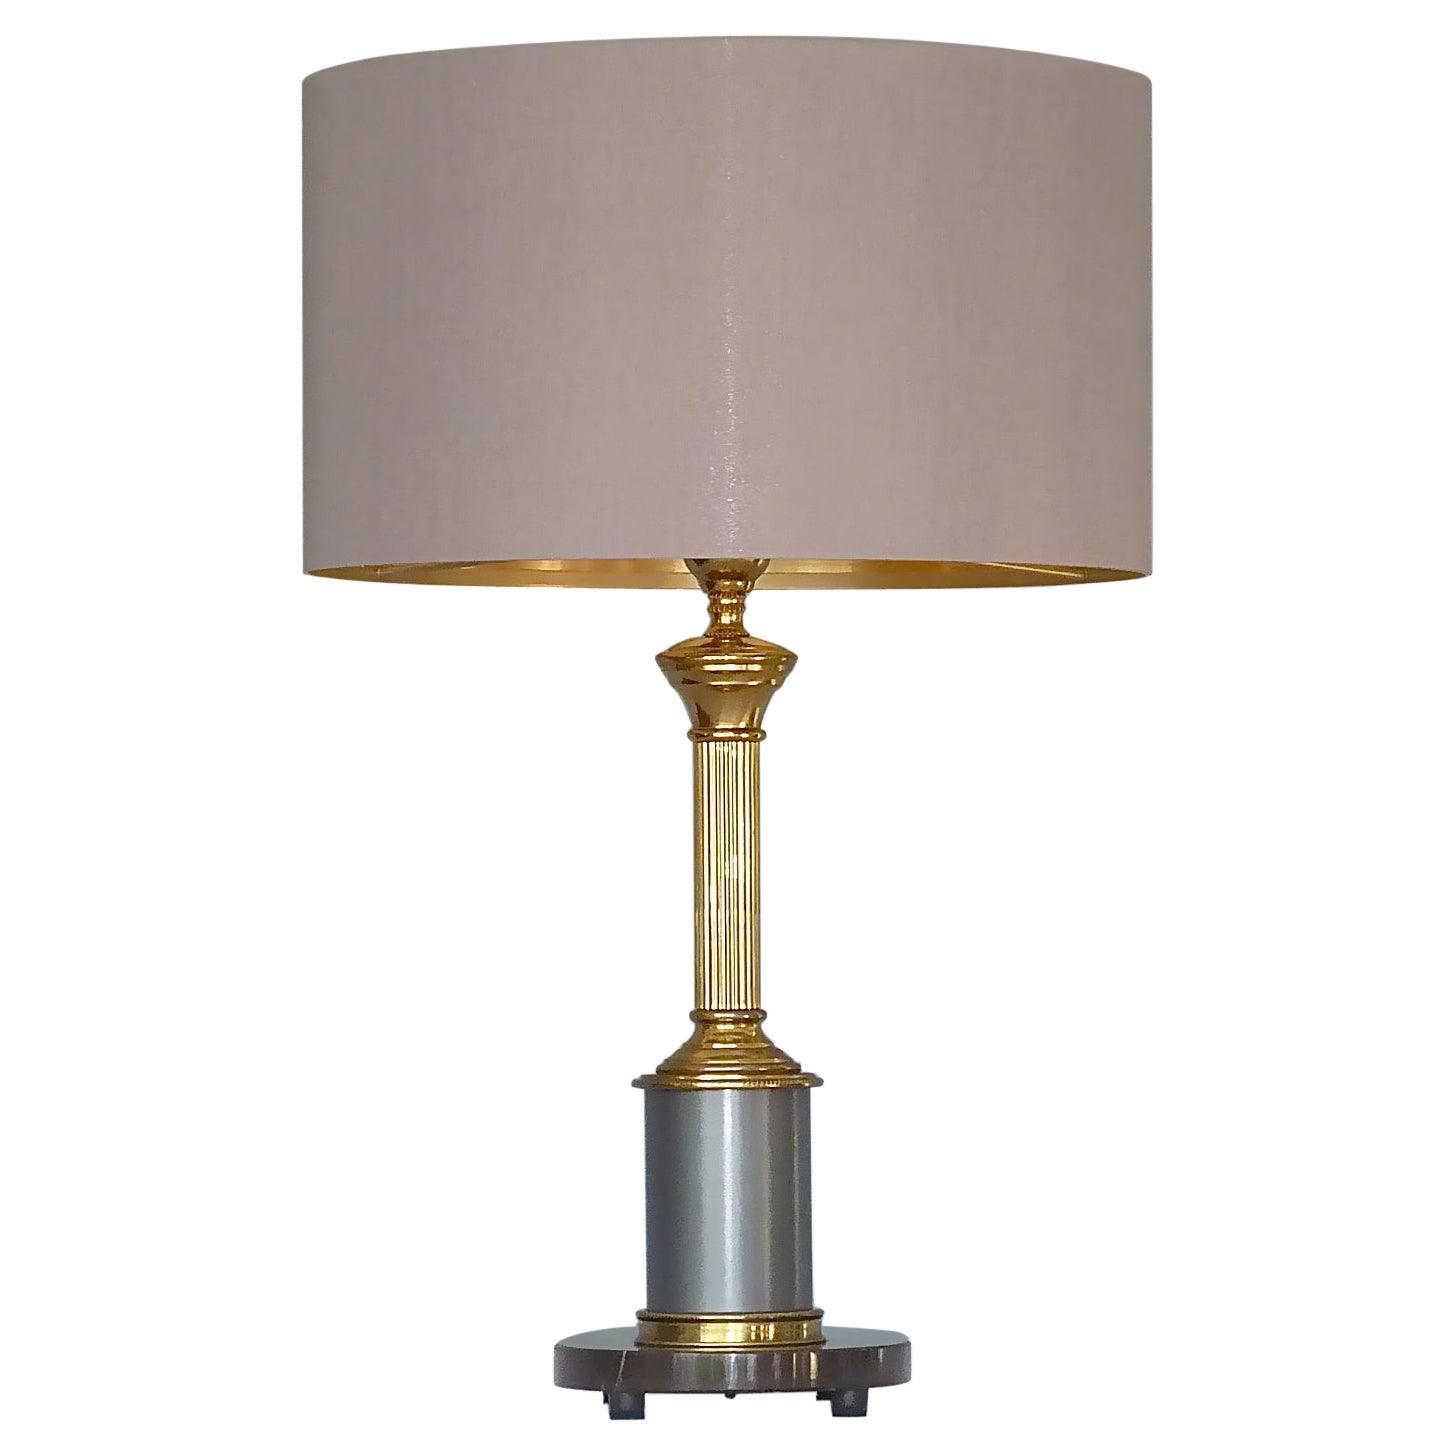 Classical French Maison Jansen Table Lamp Marble Gunmetal Brass, 1950s, Charles For Sale